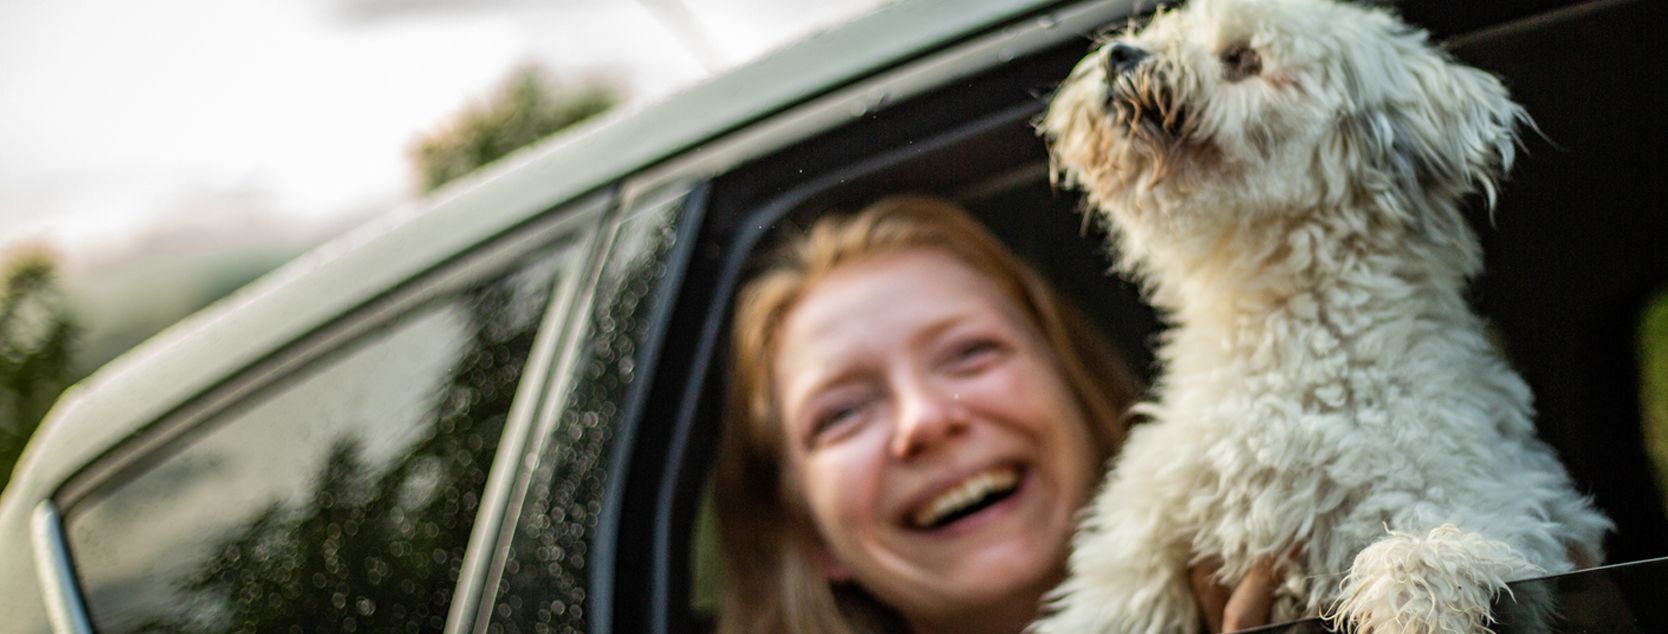 A passenger laughs as a dog sticks its head out of the window of a car.